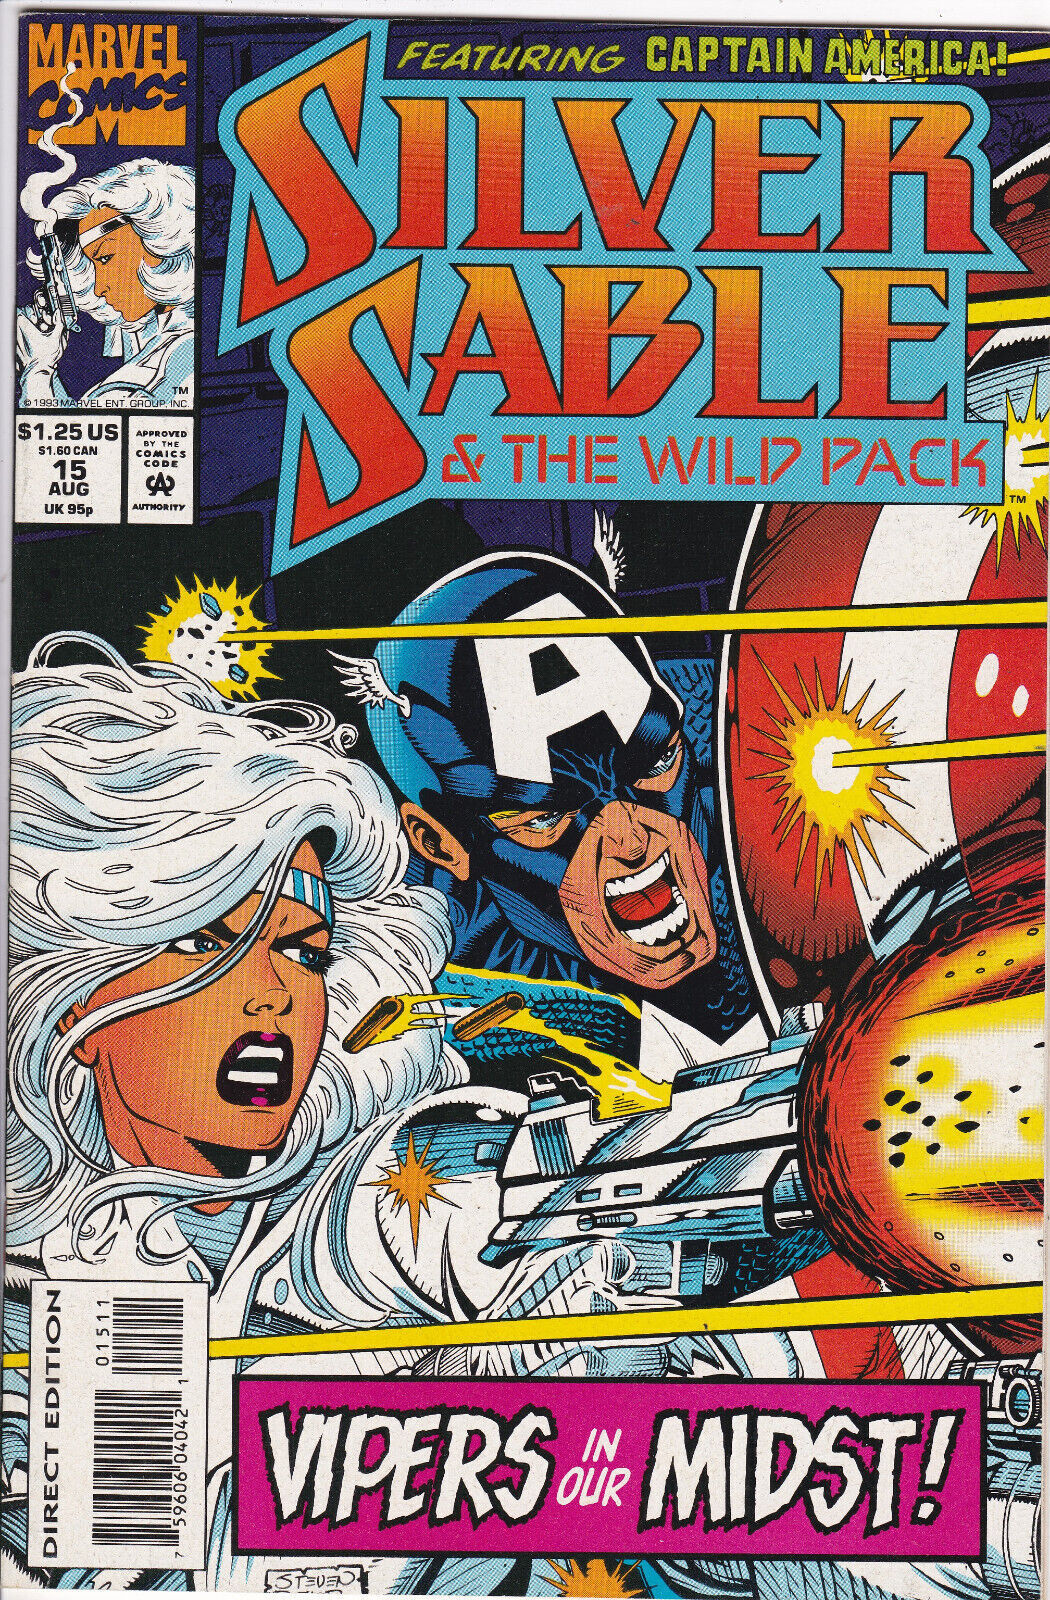 Silver Sable and the Wild Pack #15 (1991-1995, 2018) Marvel Comics, High Grade